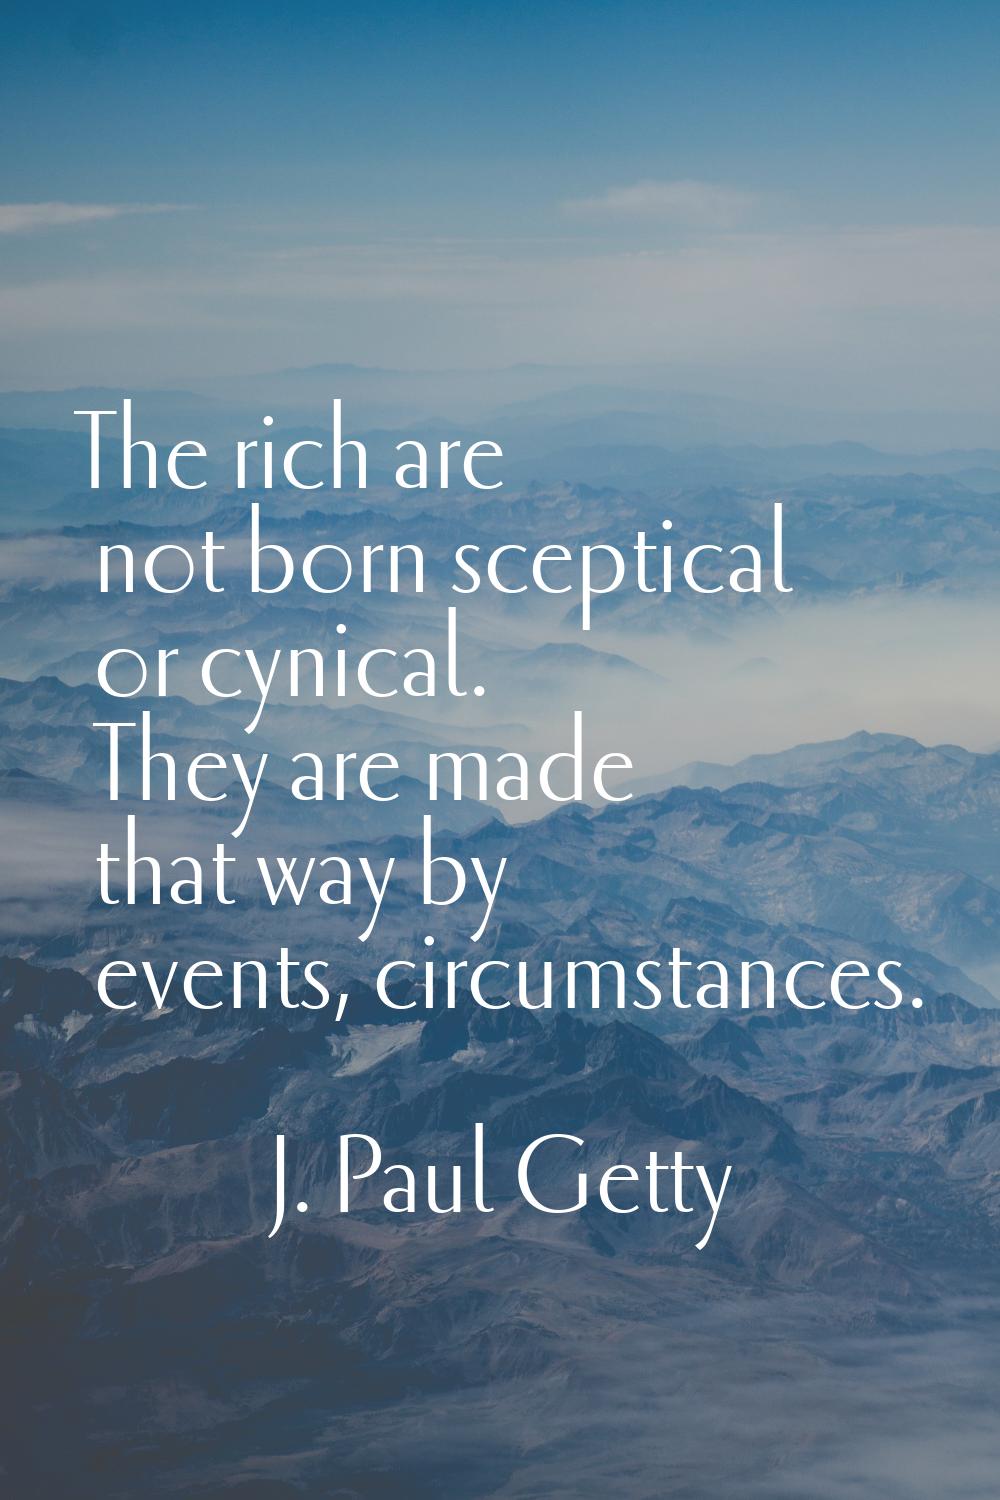 The rich are not born sceptical or cynical. They are made that way by events, circumstances.